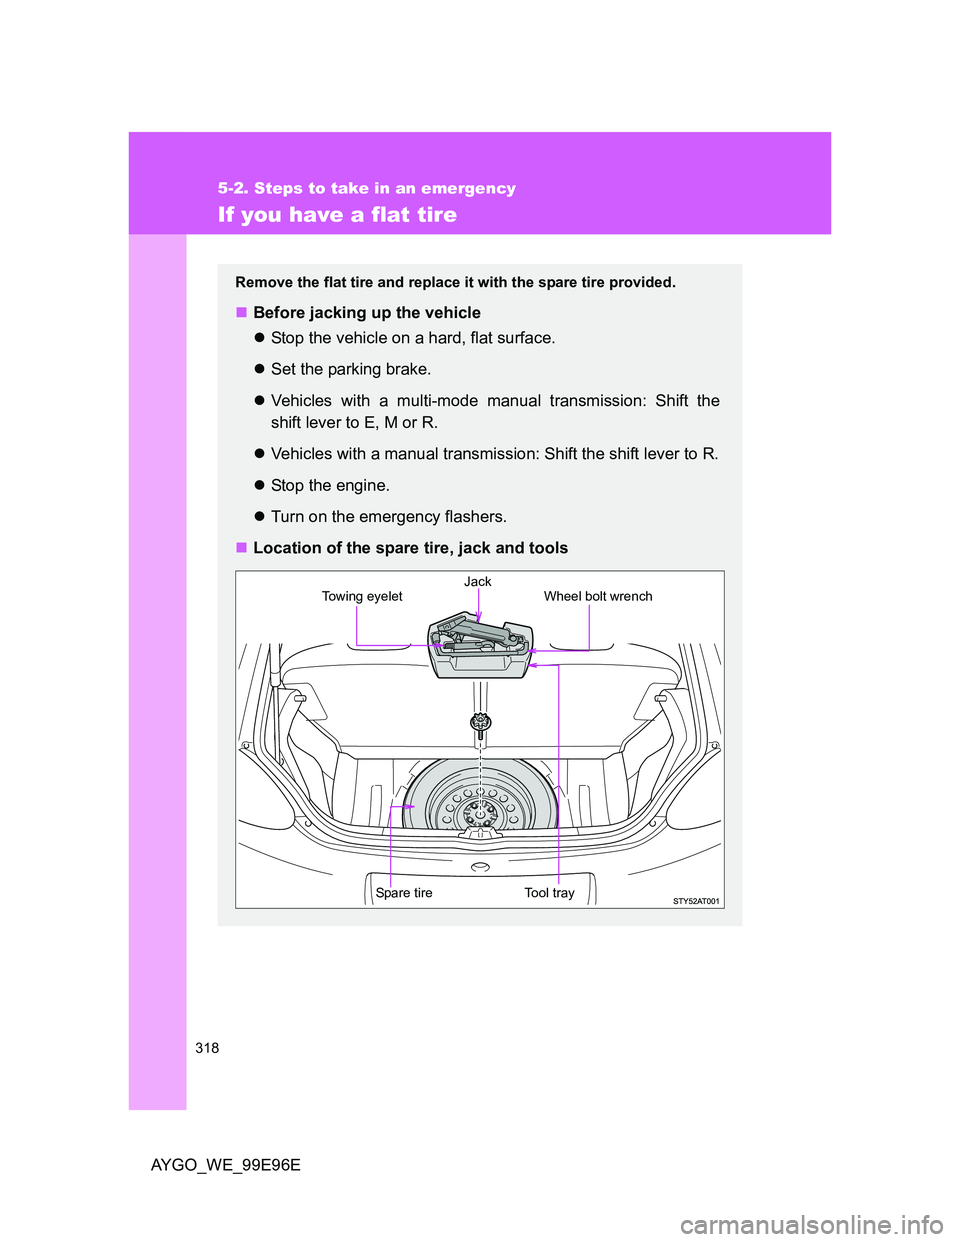 TOYOTA AYGO 2012  Owners Manual (in English) 318
5-2. Steps to take in an emergency
AYGO_WE_99E96E
If you have a flat tire
Remove the flat tire and replace it with the spare tire provided.
Before jacking up the vehicle
Stop the vehicle on 